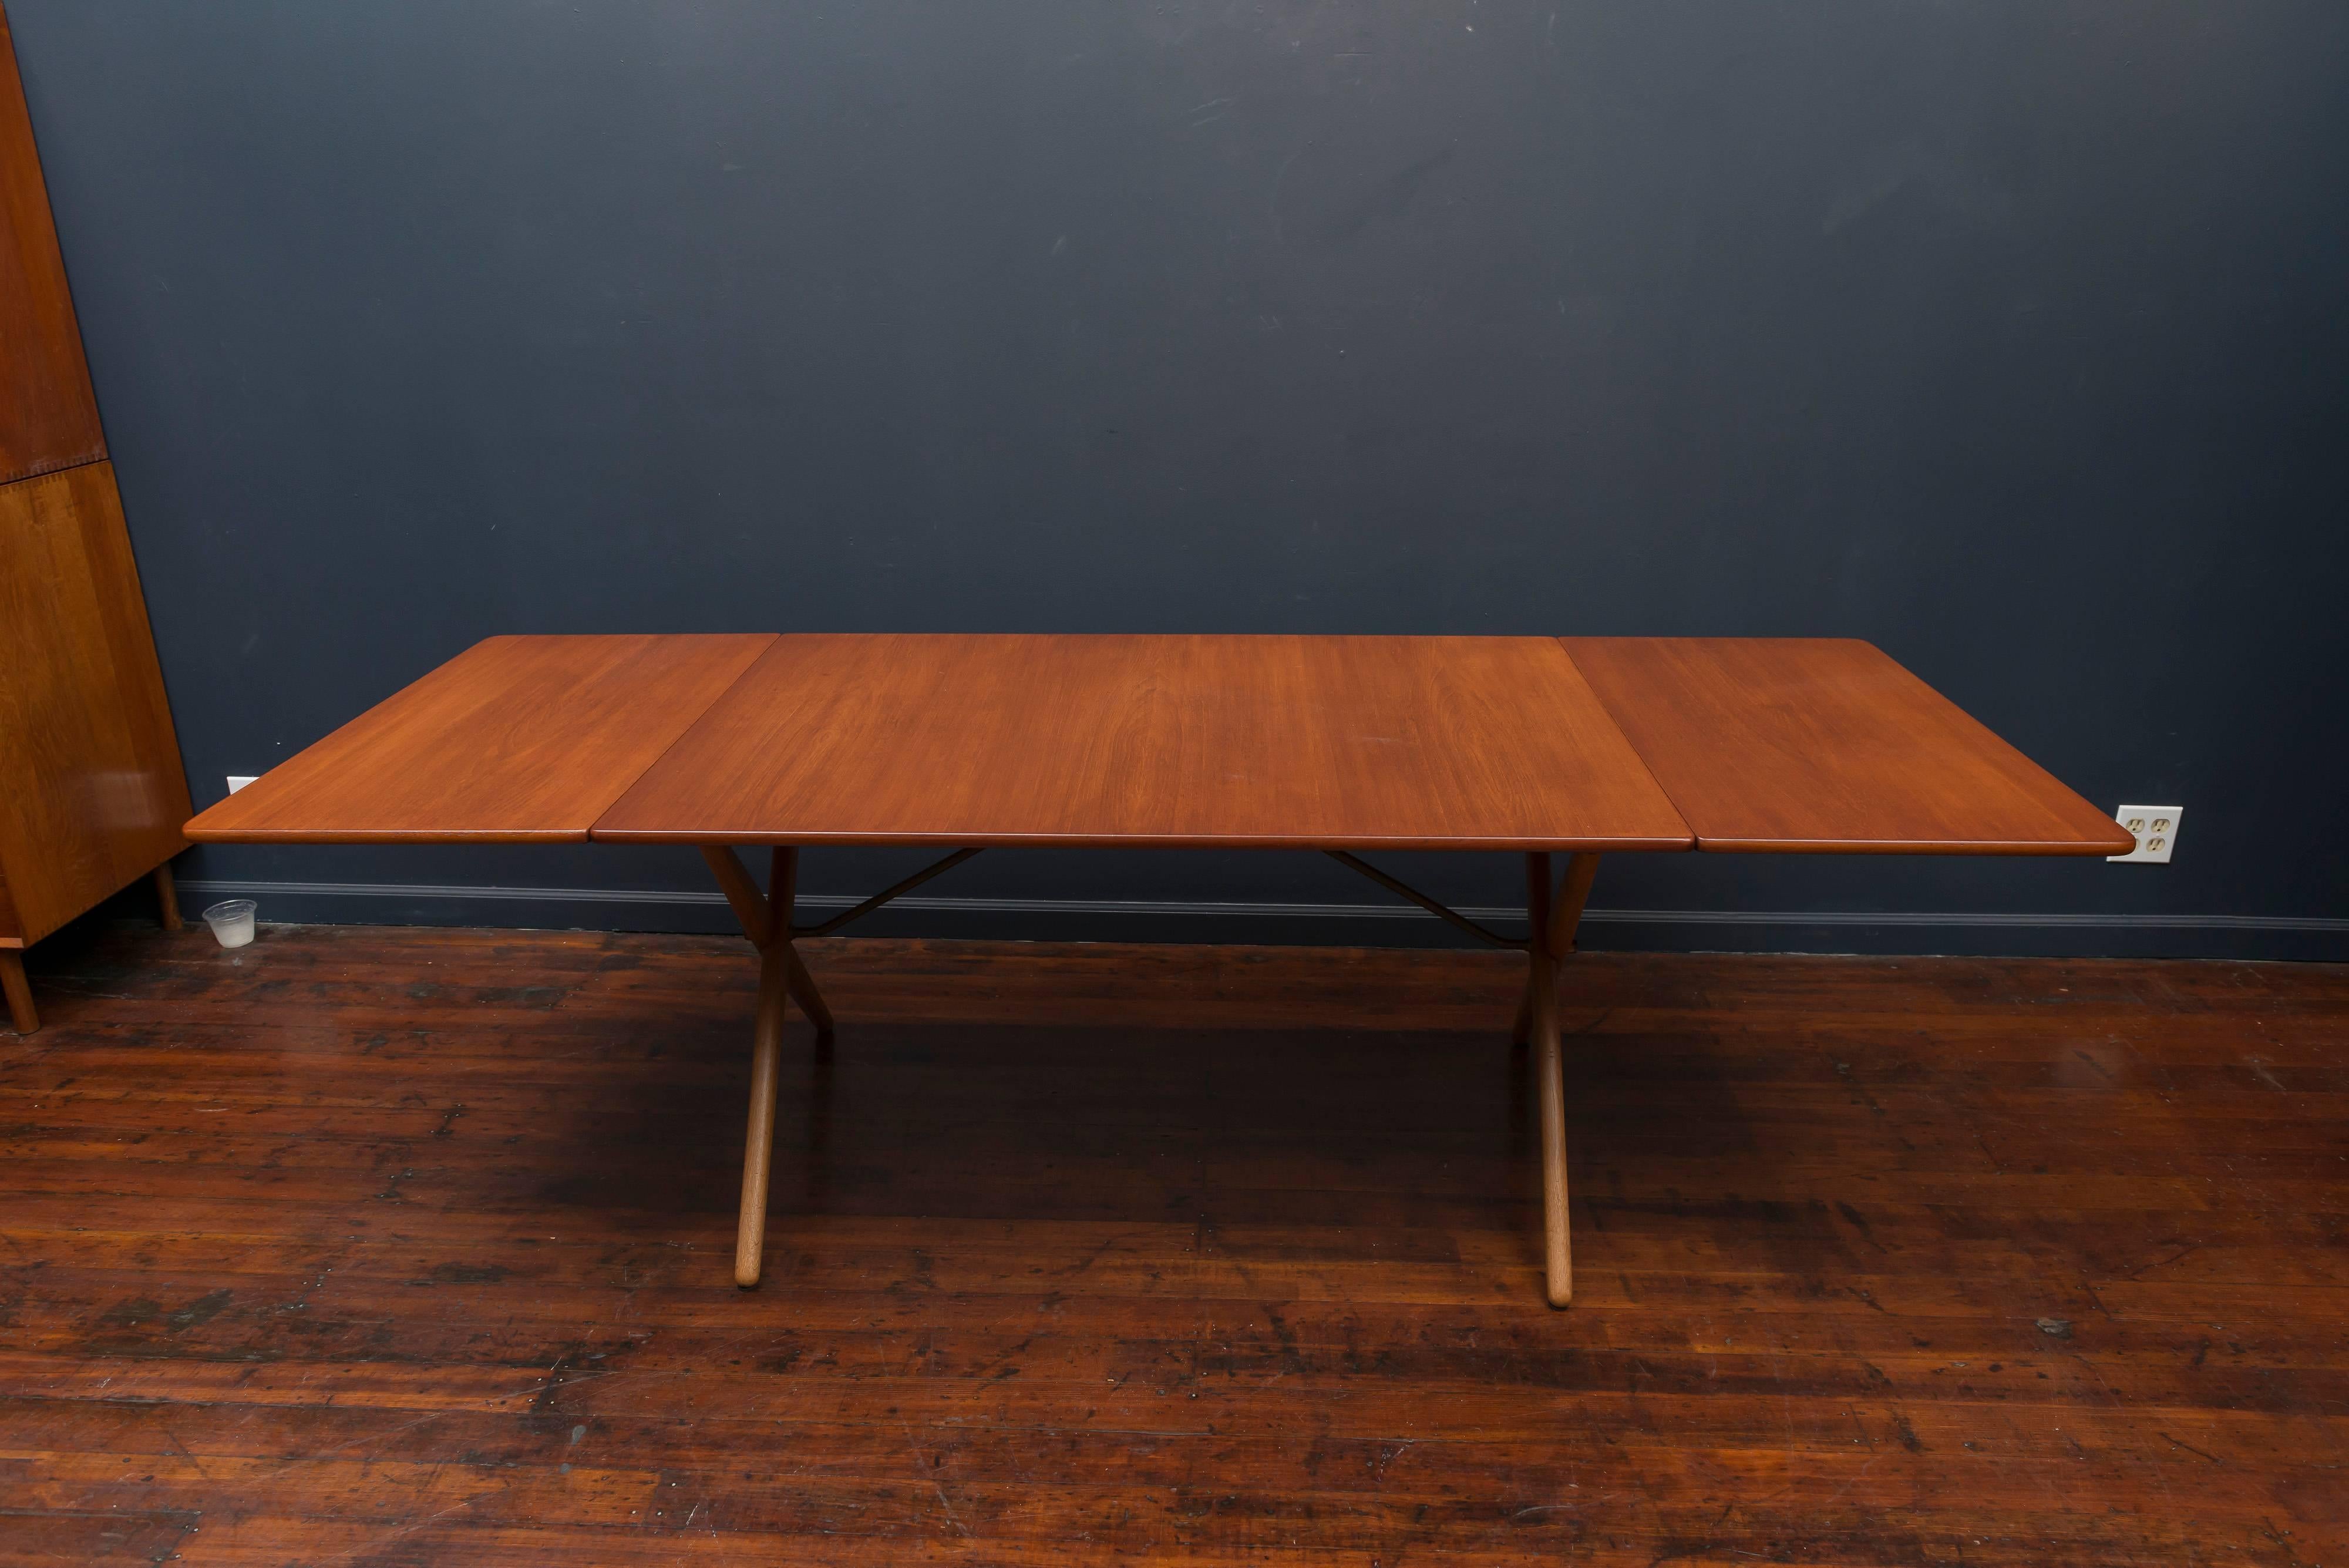 Hans Wegner design drop leaf dining table for Andreas Tuck, Denmark. Perfectly refinished teak top and leaves on a solid oak X-base with architectural brass supports, signed.
Fully open width is 89.75 inches.